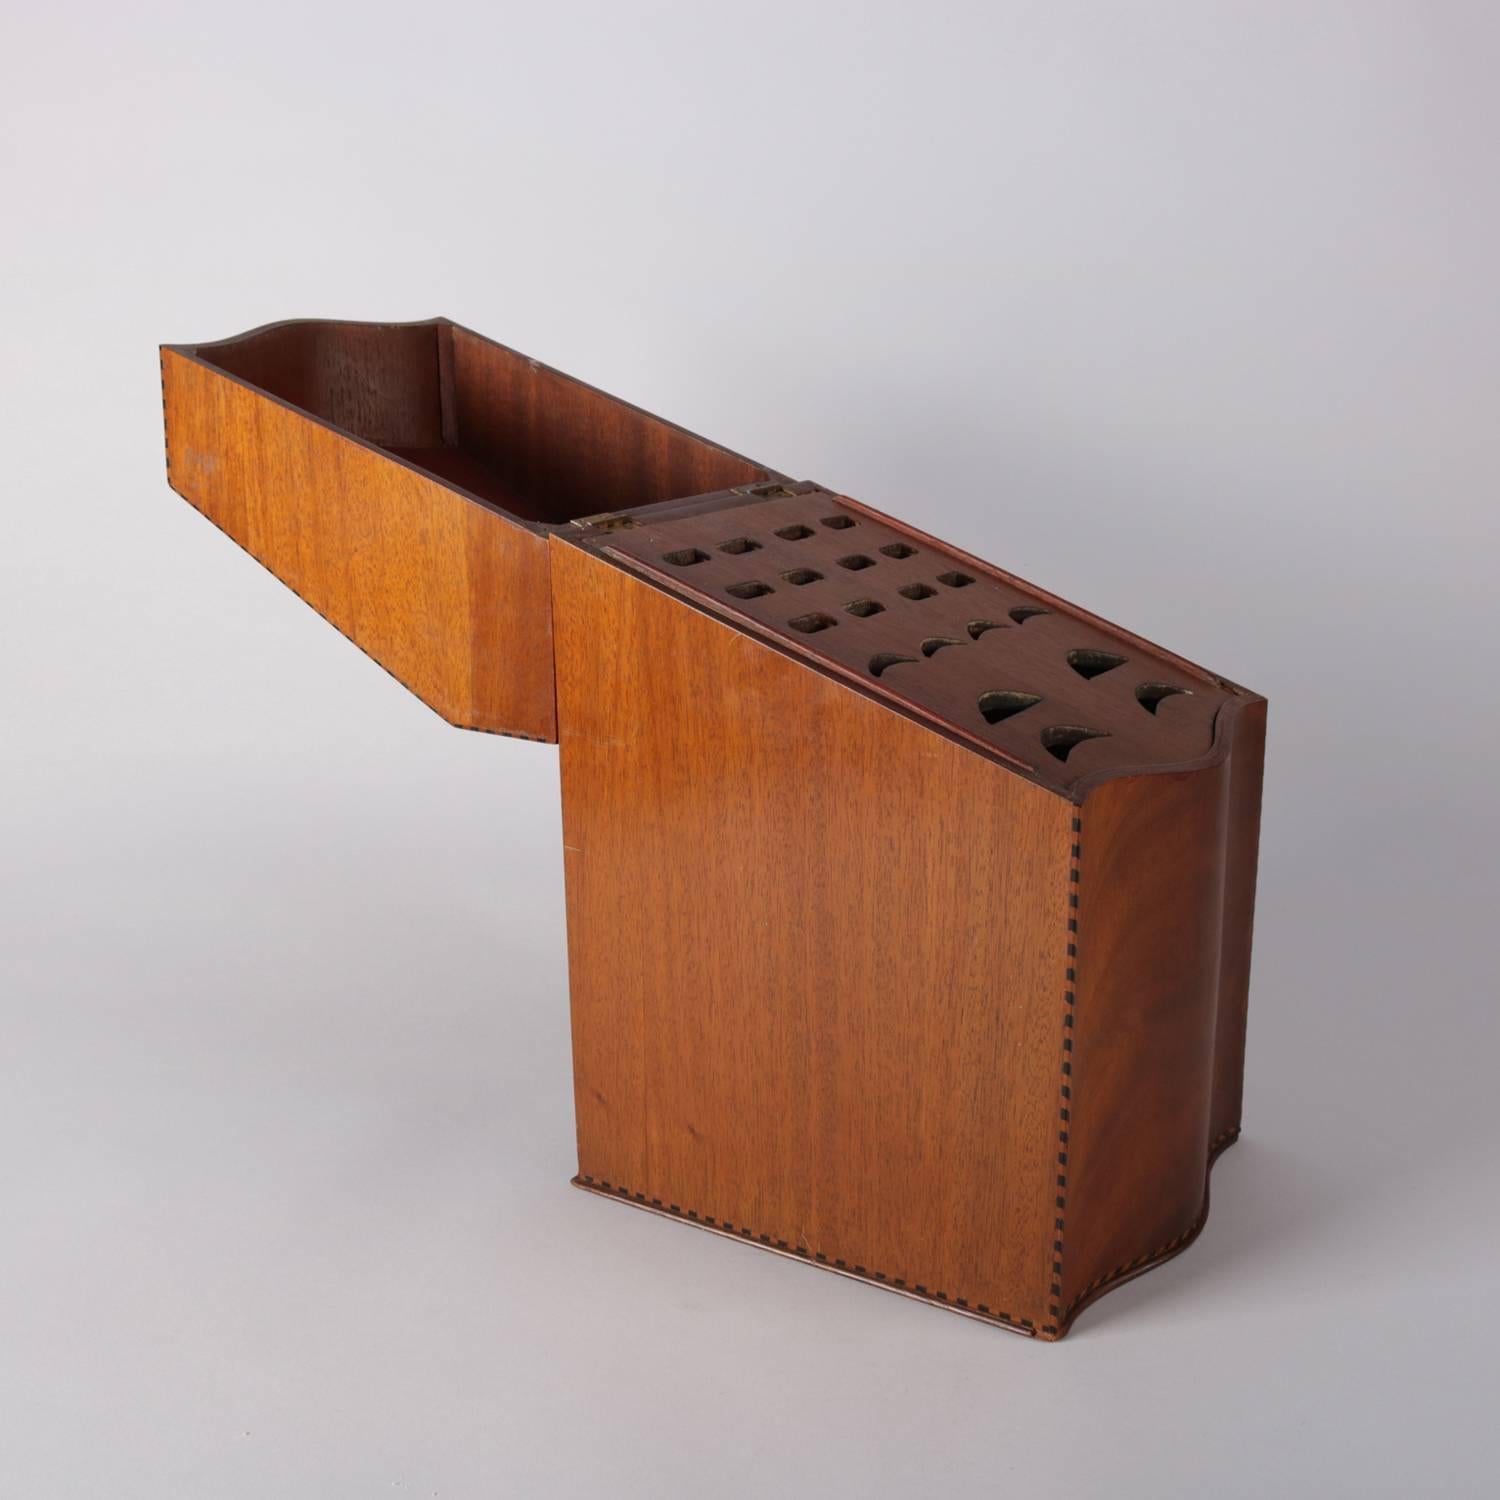 French Antique Flame Mahogany Federal Banded, Ebonized and Inlaid Knife Box, circa 1830